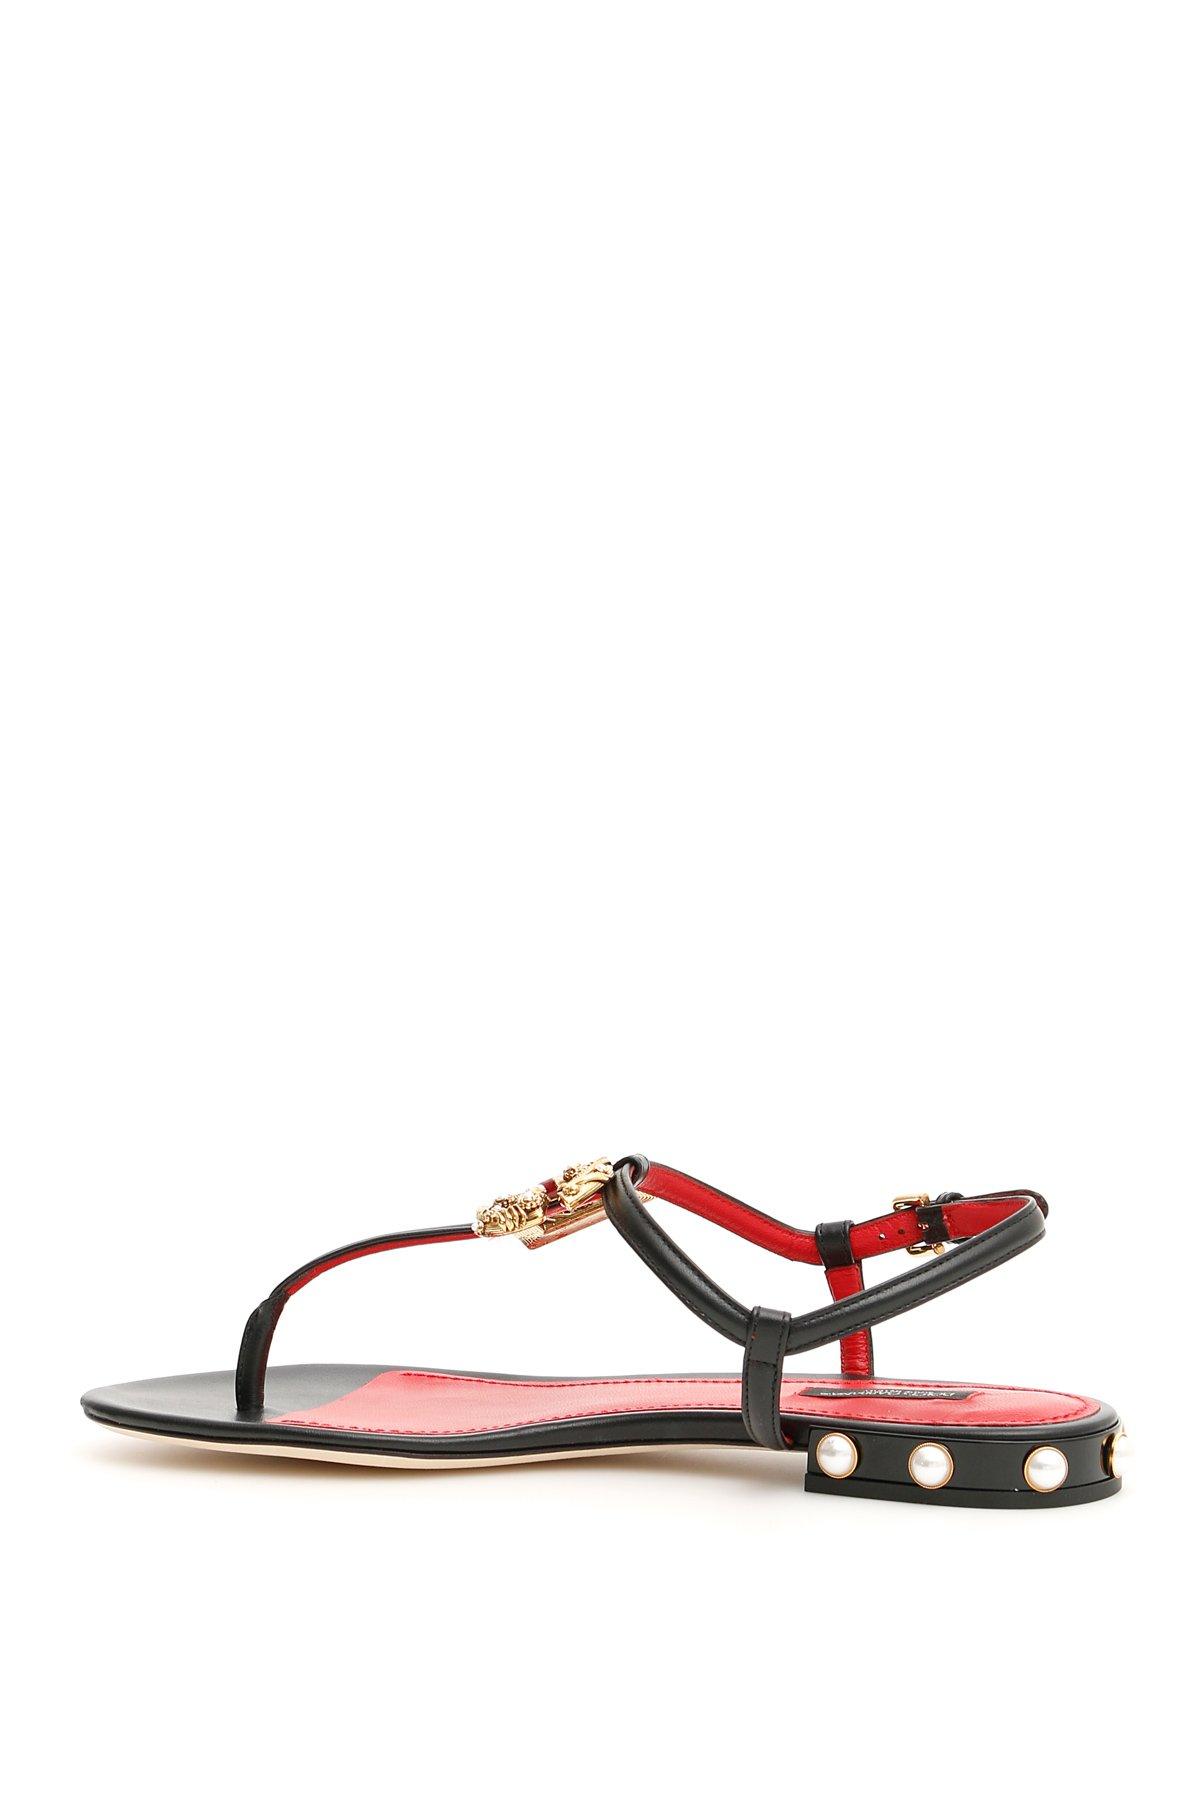 Dolce & Gabbana Leather Sandals With Logo Buckle - Save 21% - Lyst